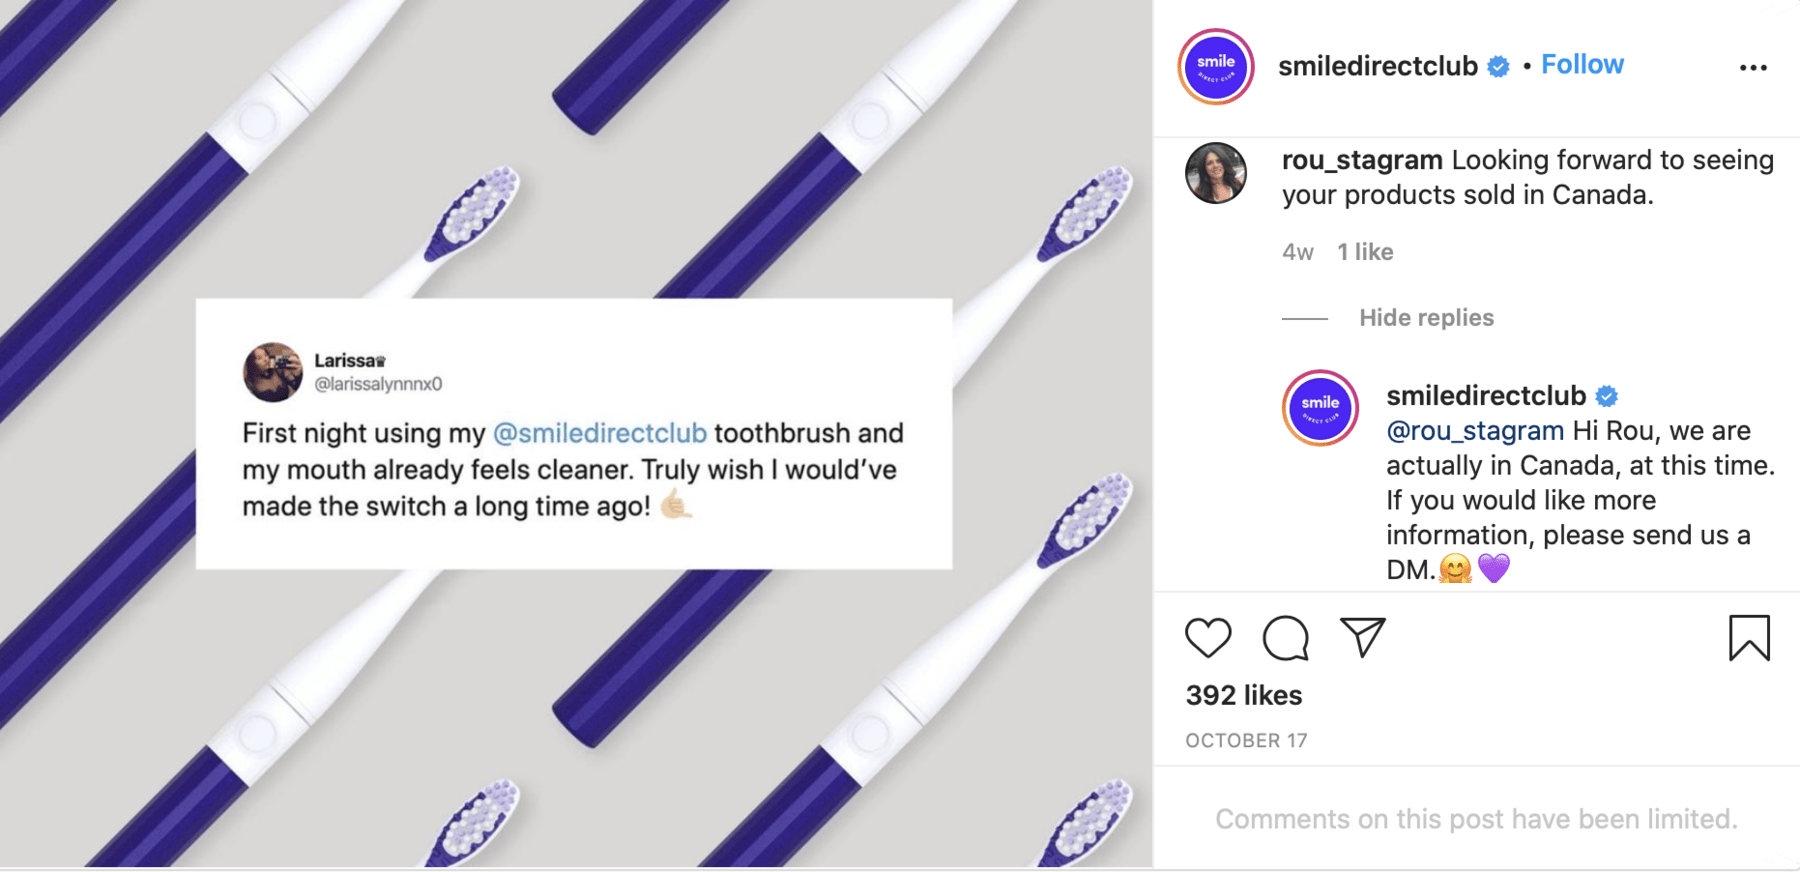 Customer Service on Instagram: The Complete Guide